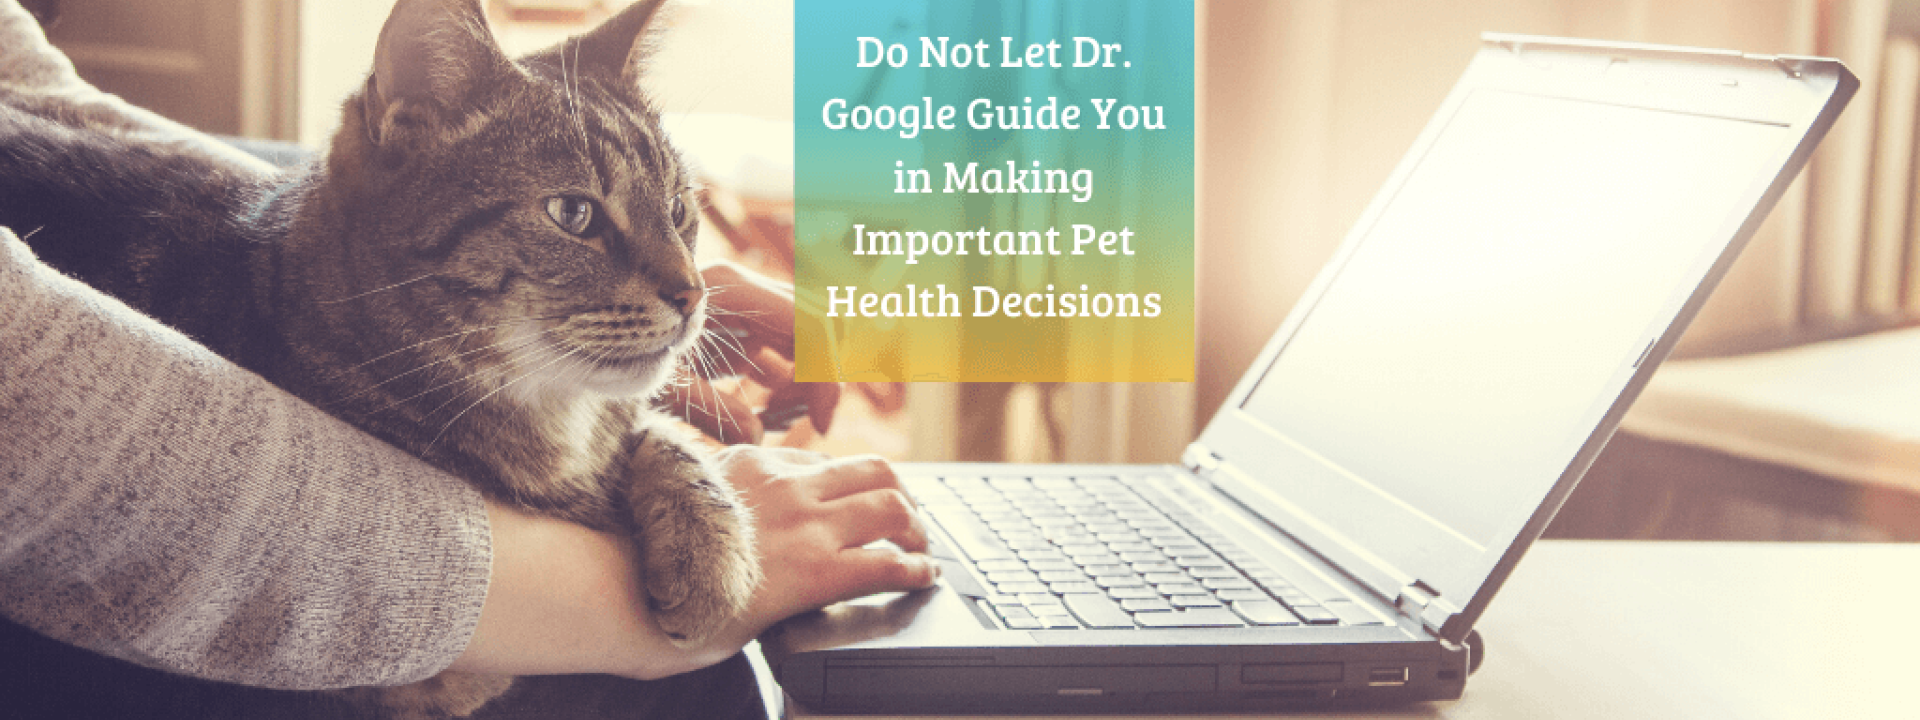 dont-use-google-pet-health.png